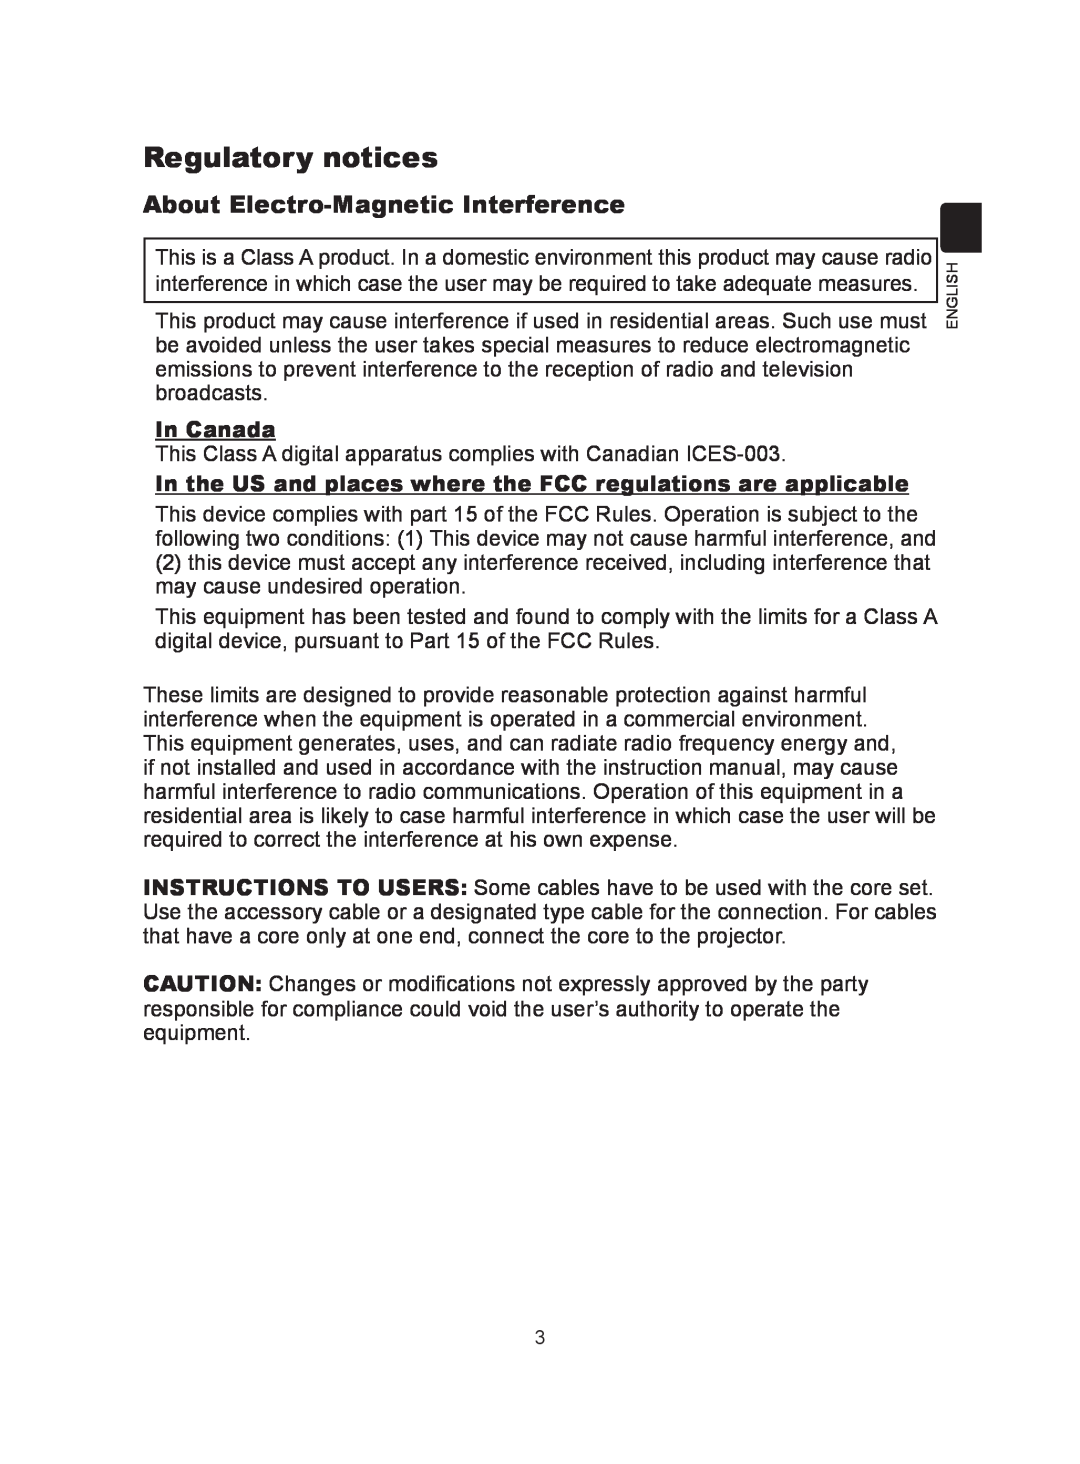 Hitachi CP-A300N user manual Regulatory notices, About Electro-Magnetic Interference, In Canada 